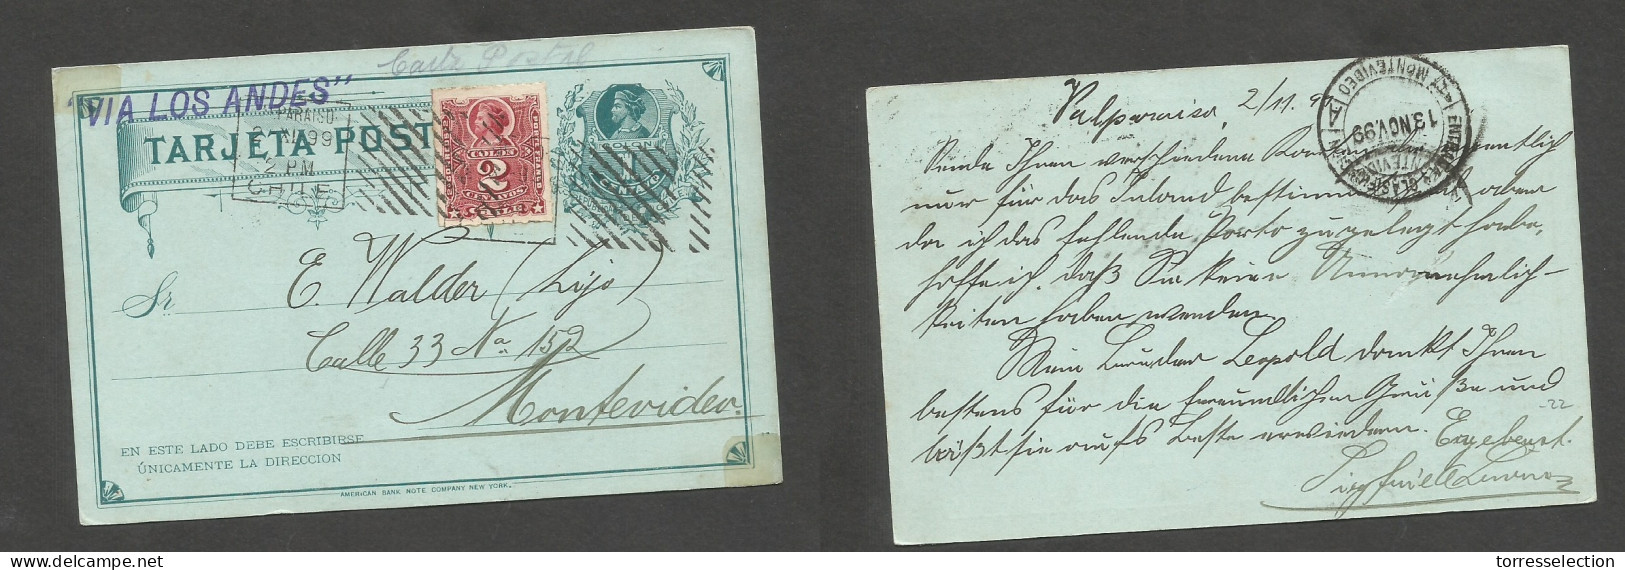 CHILE - Stationery. 1899 (2 Nov) Valp - Montevideo, Uruguay Via Los Andes, 1c Green Stat Card + 2c Red Perce Adtl, Tied  - Cile